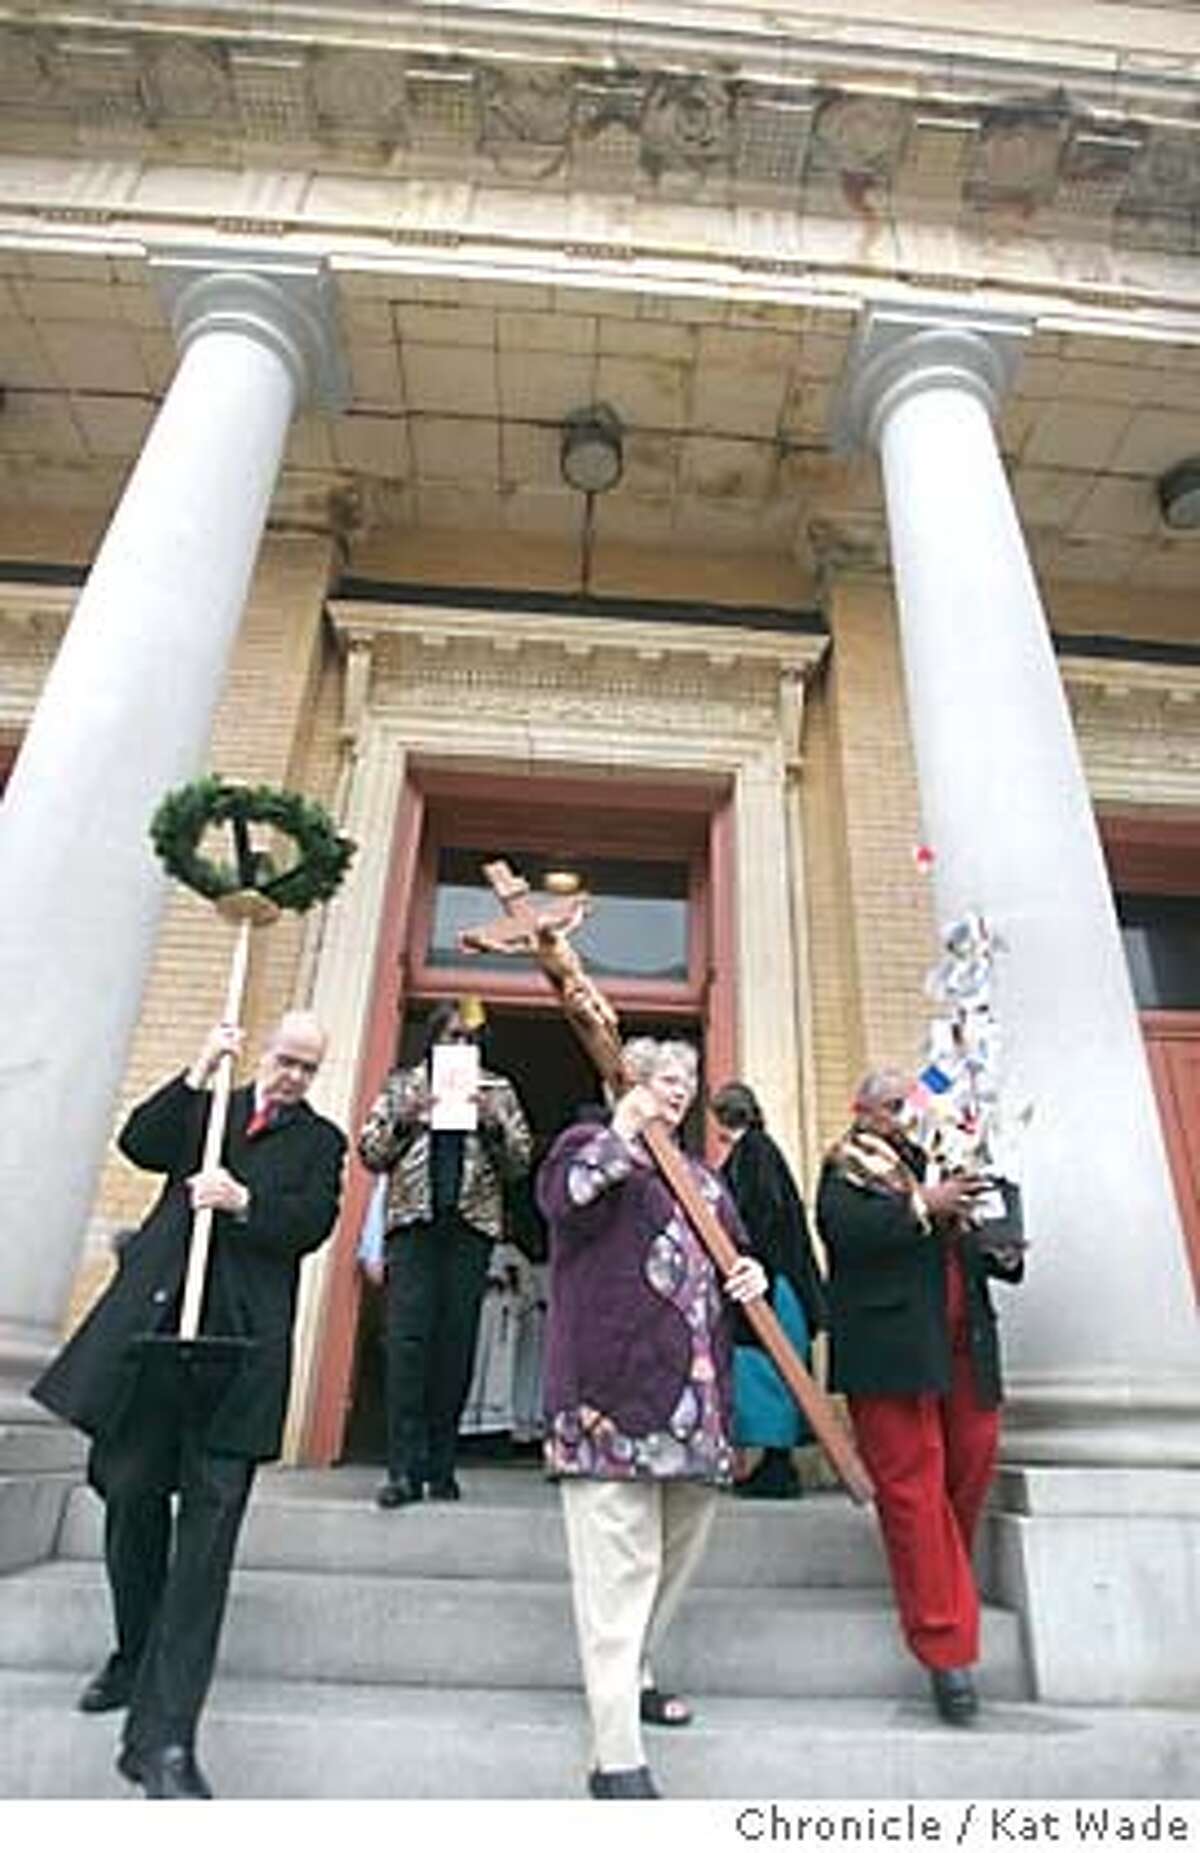 LASTMASS27_223_KW.jpg On 12/26/04 in San Francisco Cross Bearer, Norma Dahnken (CENTER) ceremoniously leads the congregation out of Sacred Heart Church for the last time after Pastor Paulinus Mangesho celebrated the final Sunday Mass for Sacred Heart Church, an icon in the Western Addition for 107 years which is being closed because the Roman Catholic archdiocese is not willing to part with the 8 million dollars required to retrofit the crumbling edifice. Chronicle Photo by Kat Wade Mags out/mandatory credits San Francisco Chronicle and photographer/